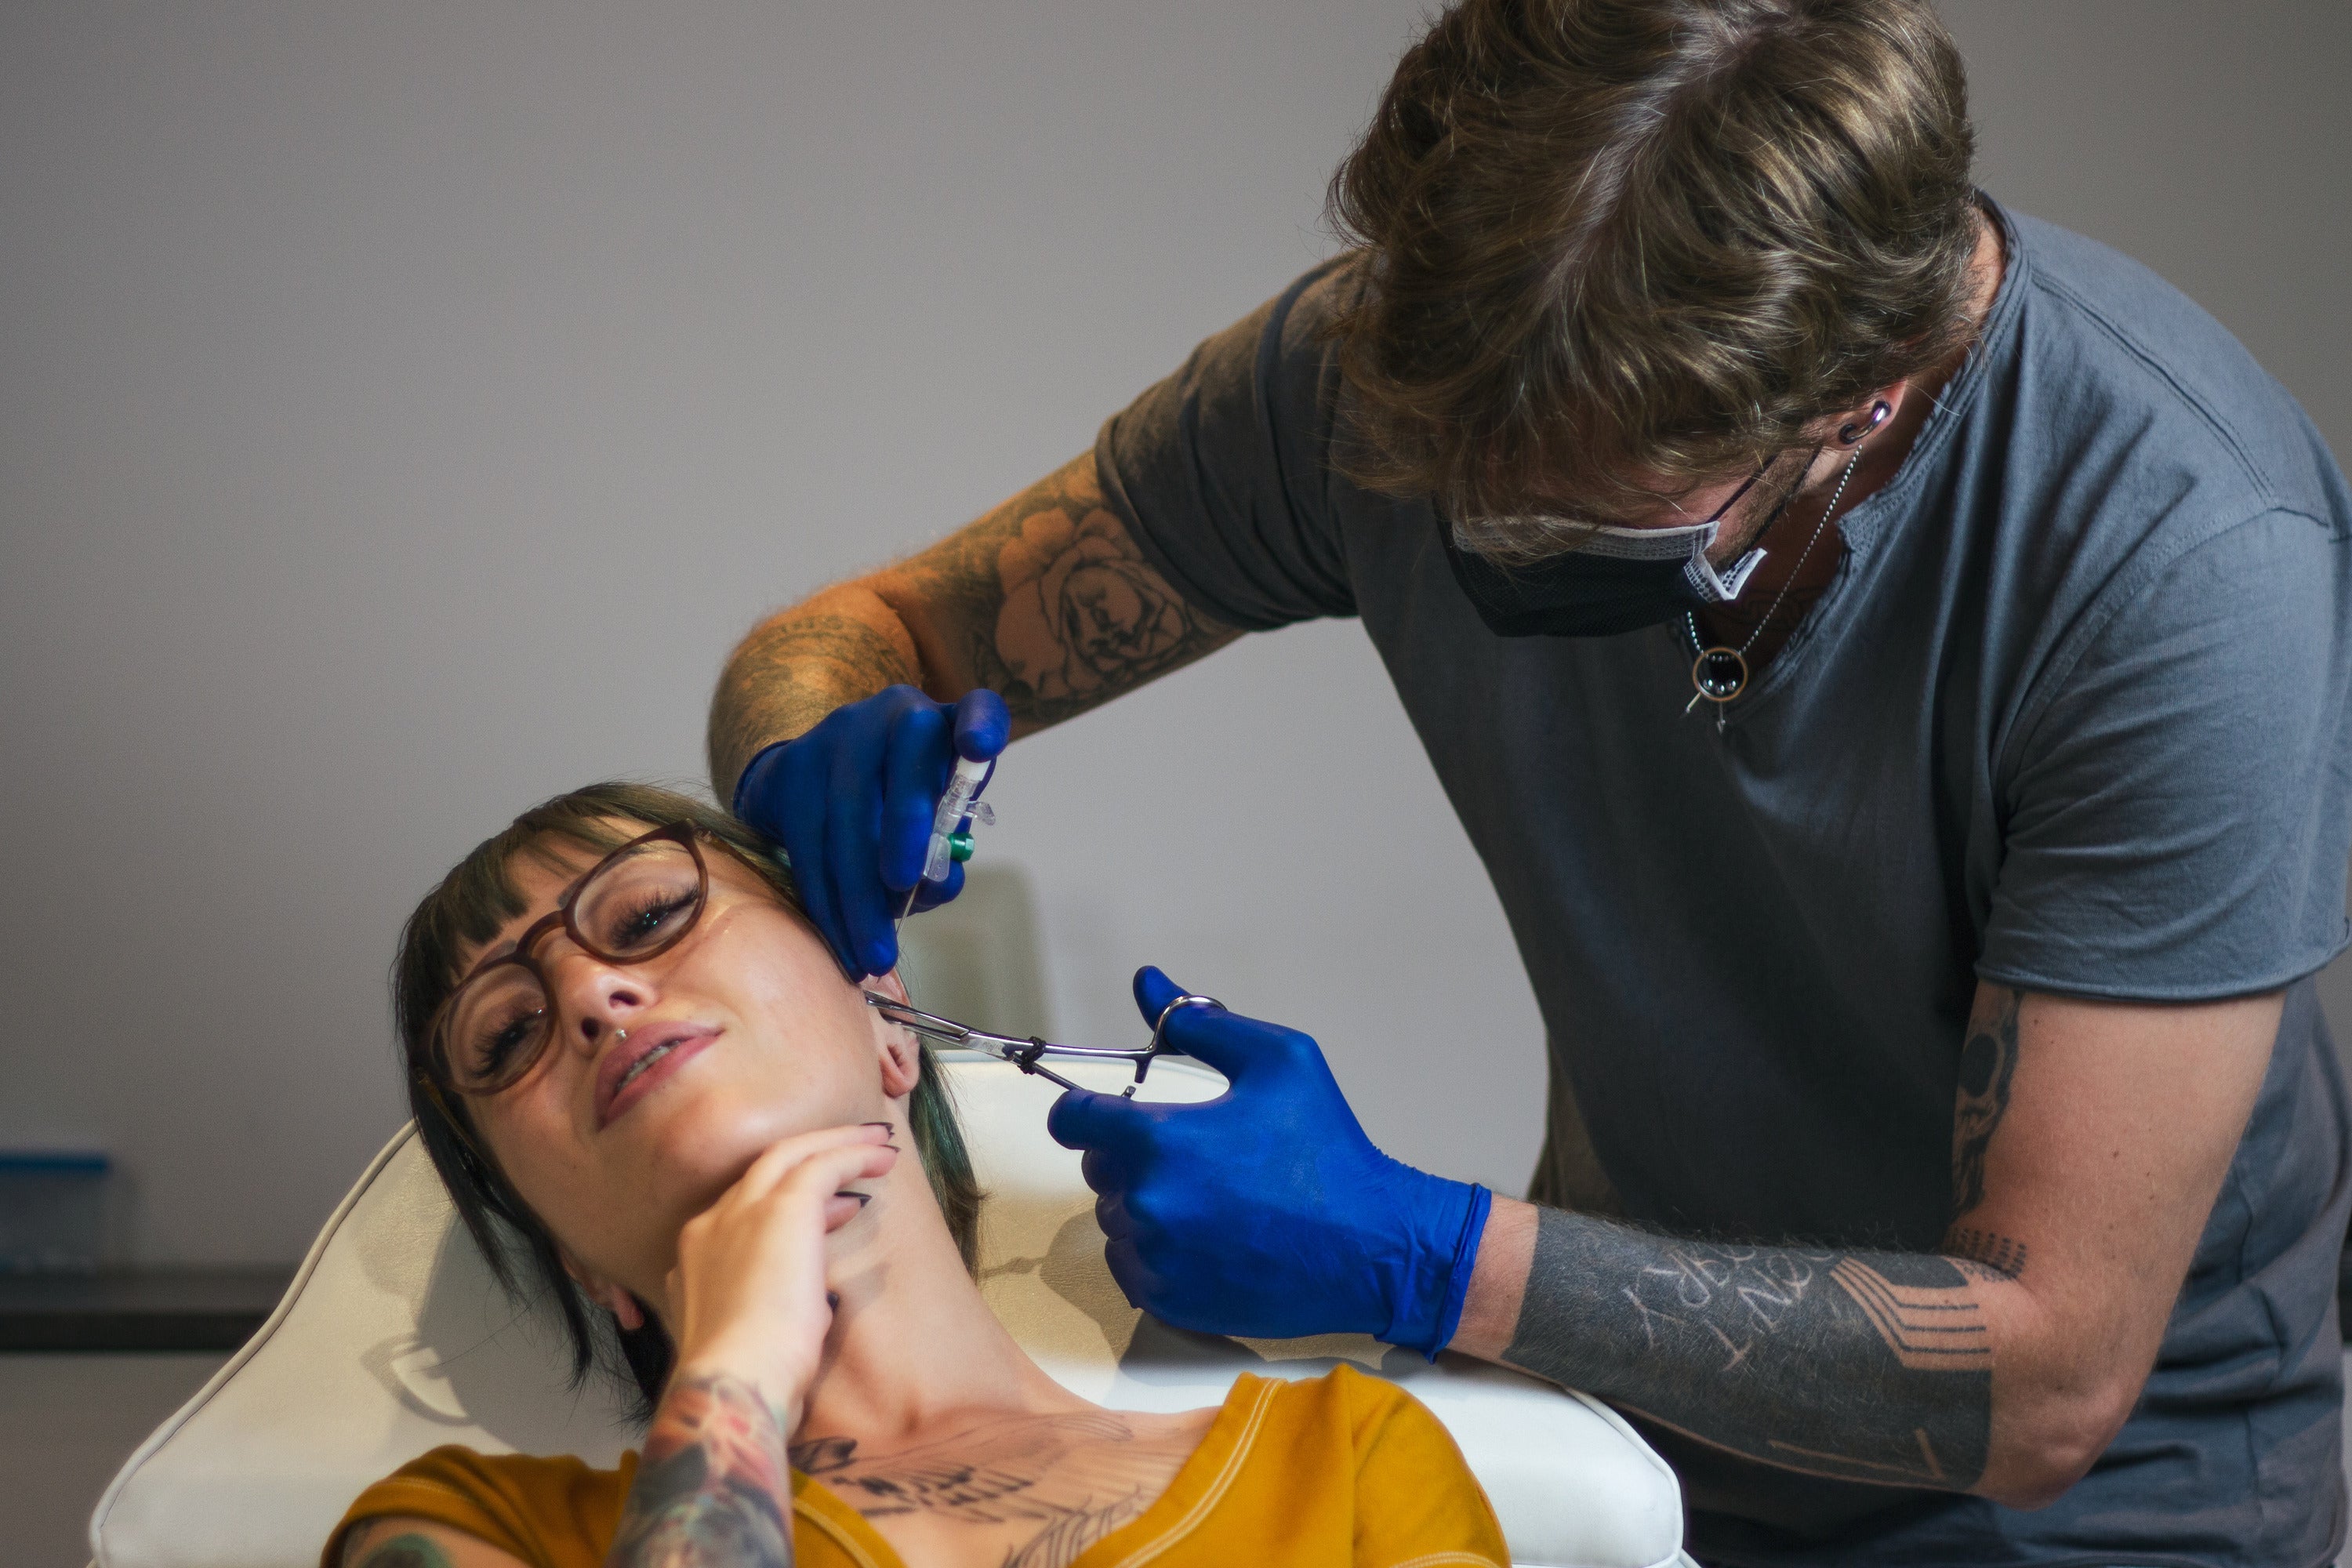 Piercing Pain During the Procedure